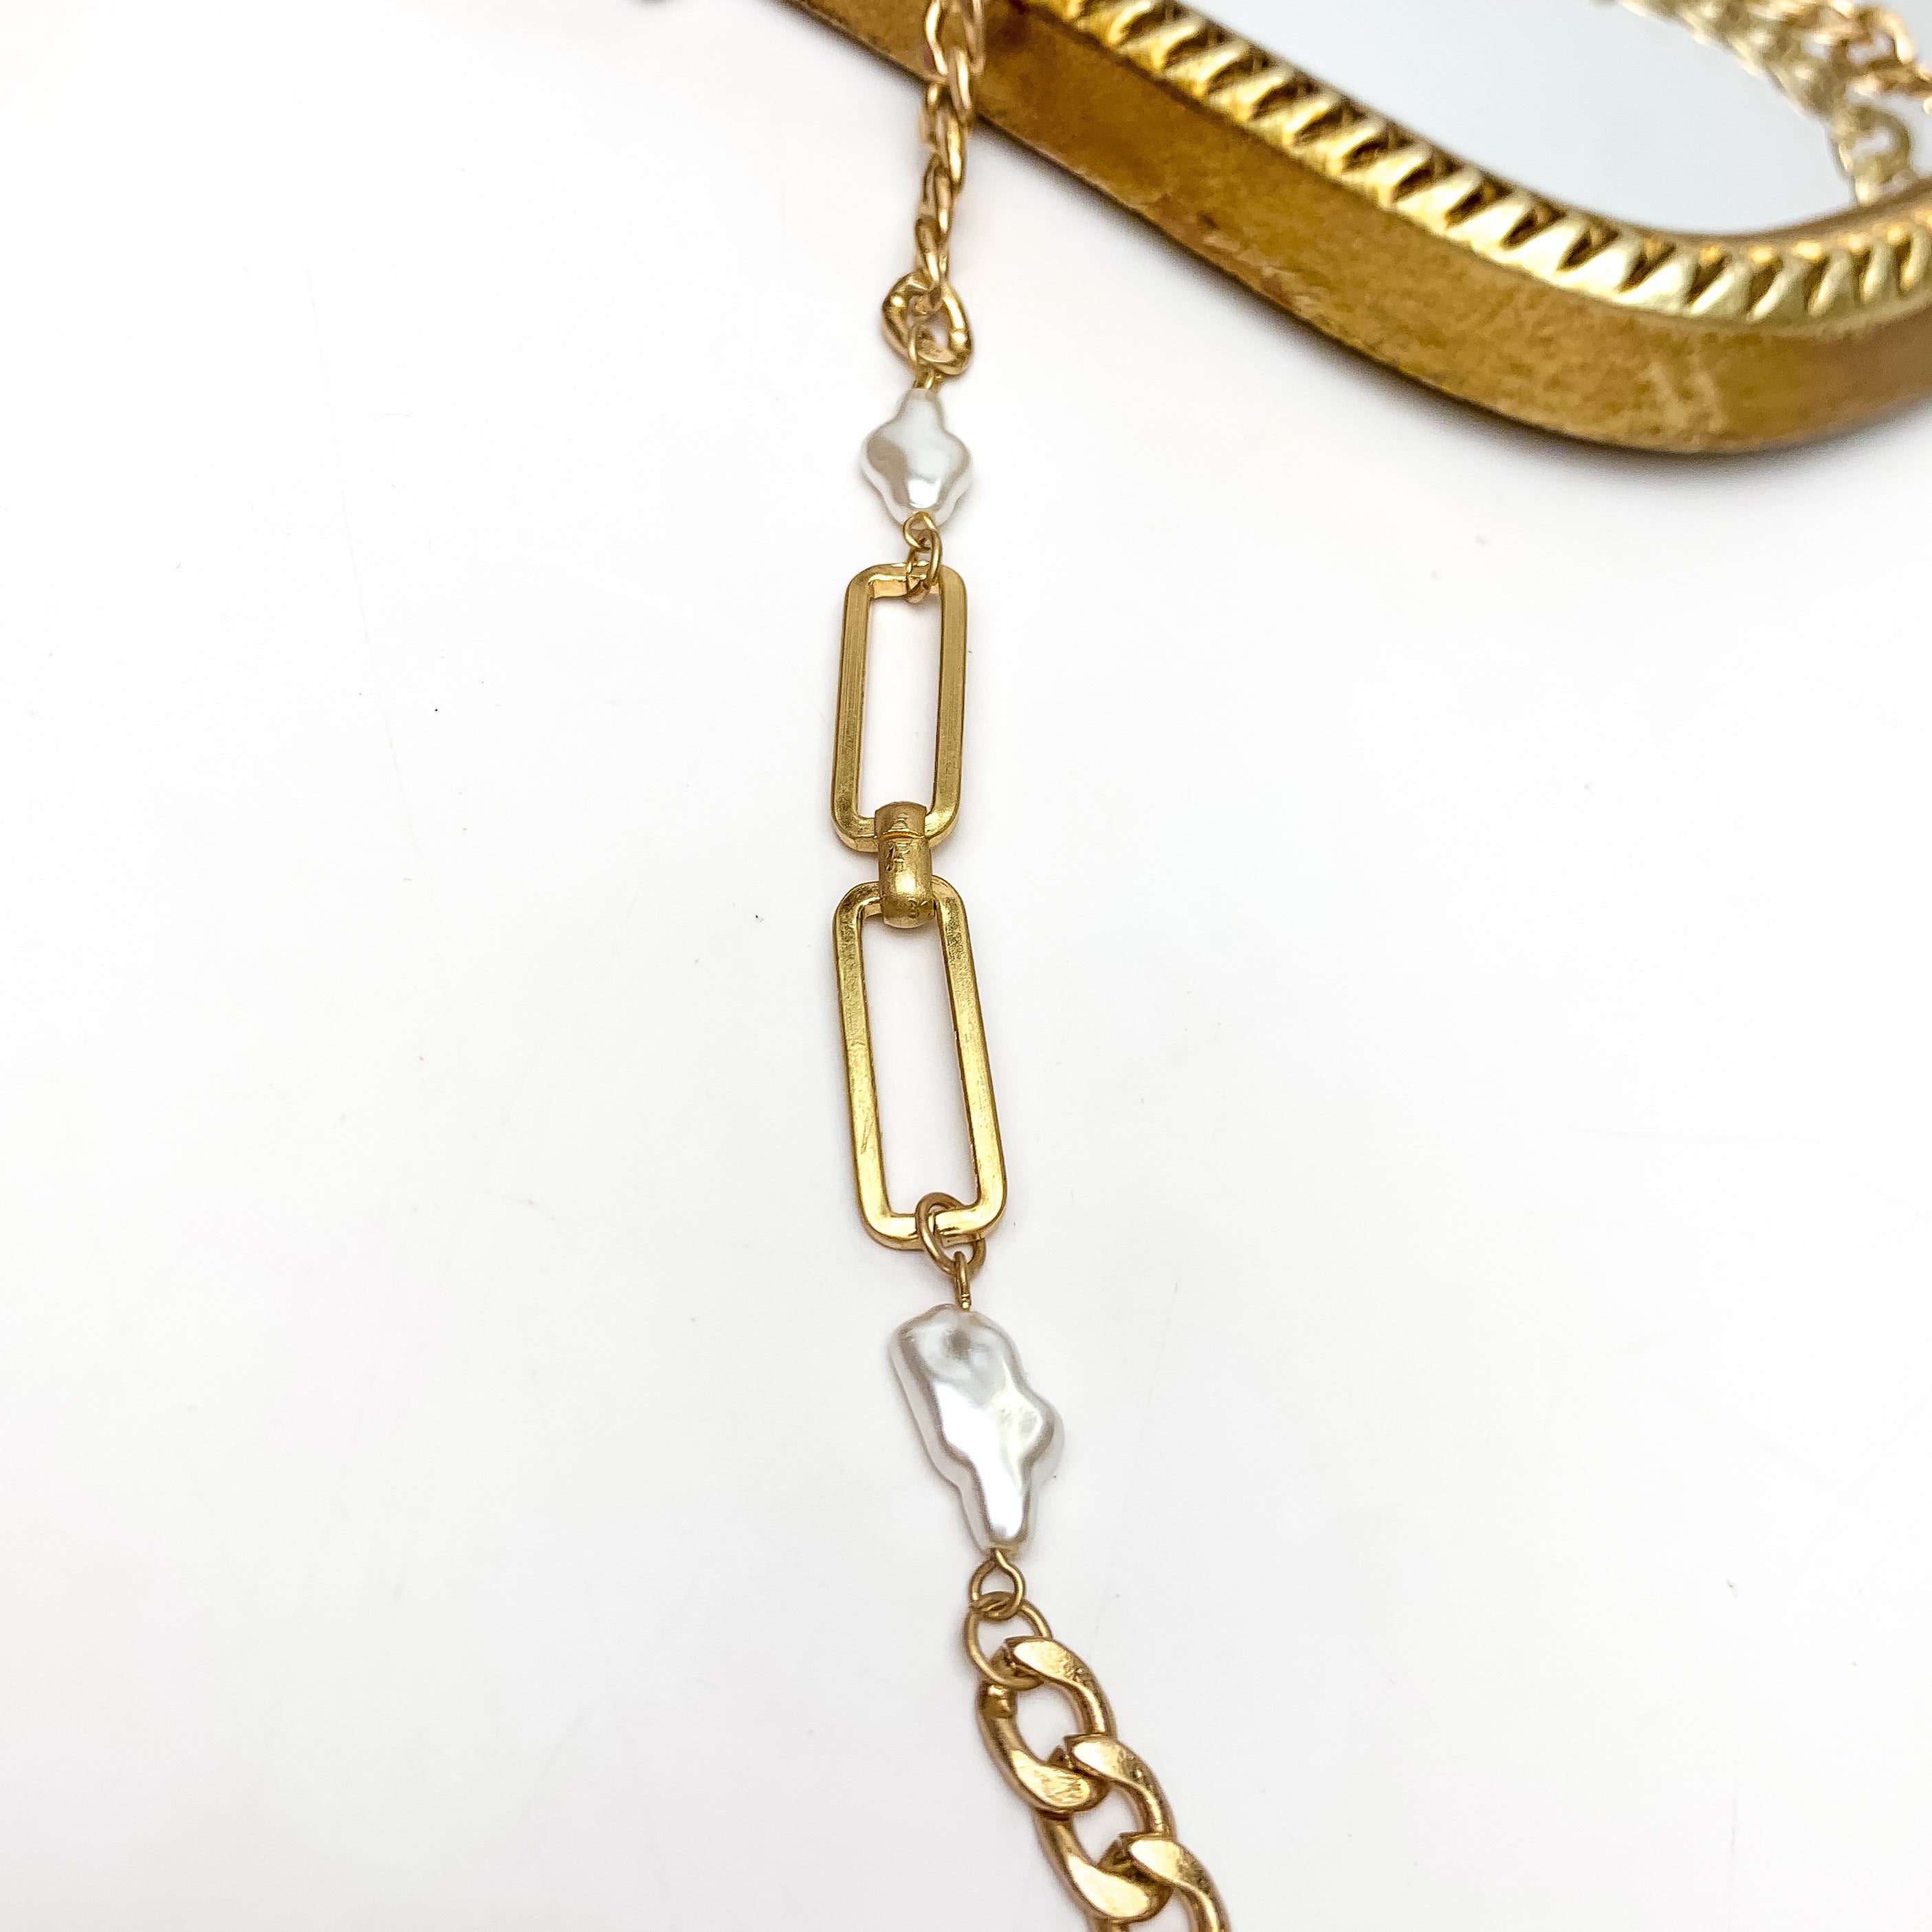 She's Pretty in Pearl Gold Tone Chain Necklace With Pearl Accents